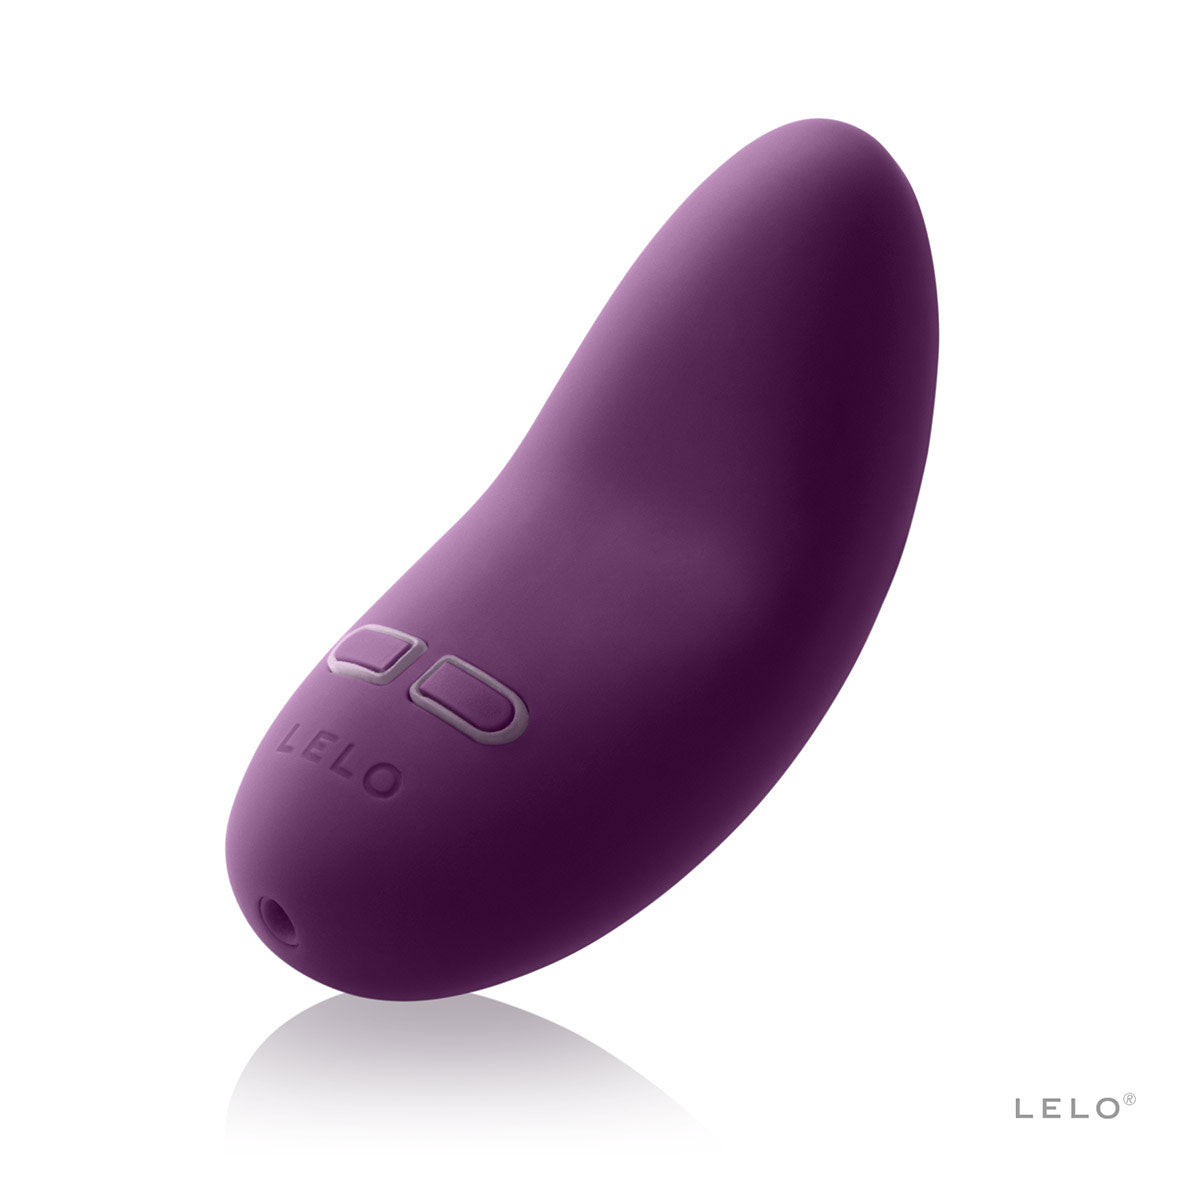 LELO Lily 2 Powerful & Discreet Clitoral Vibrator Pink